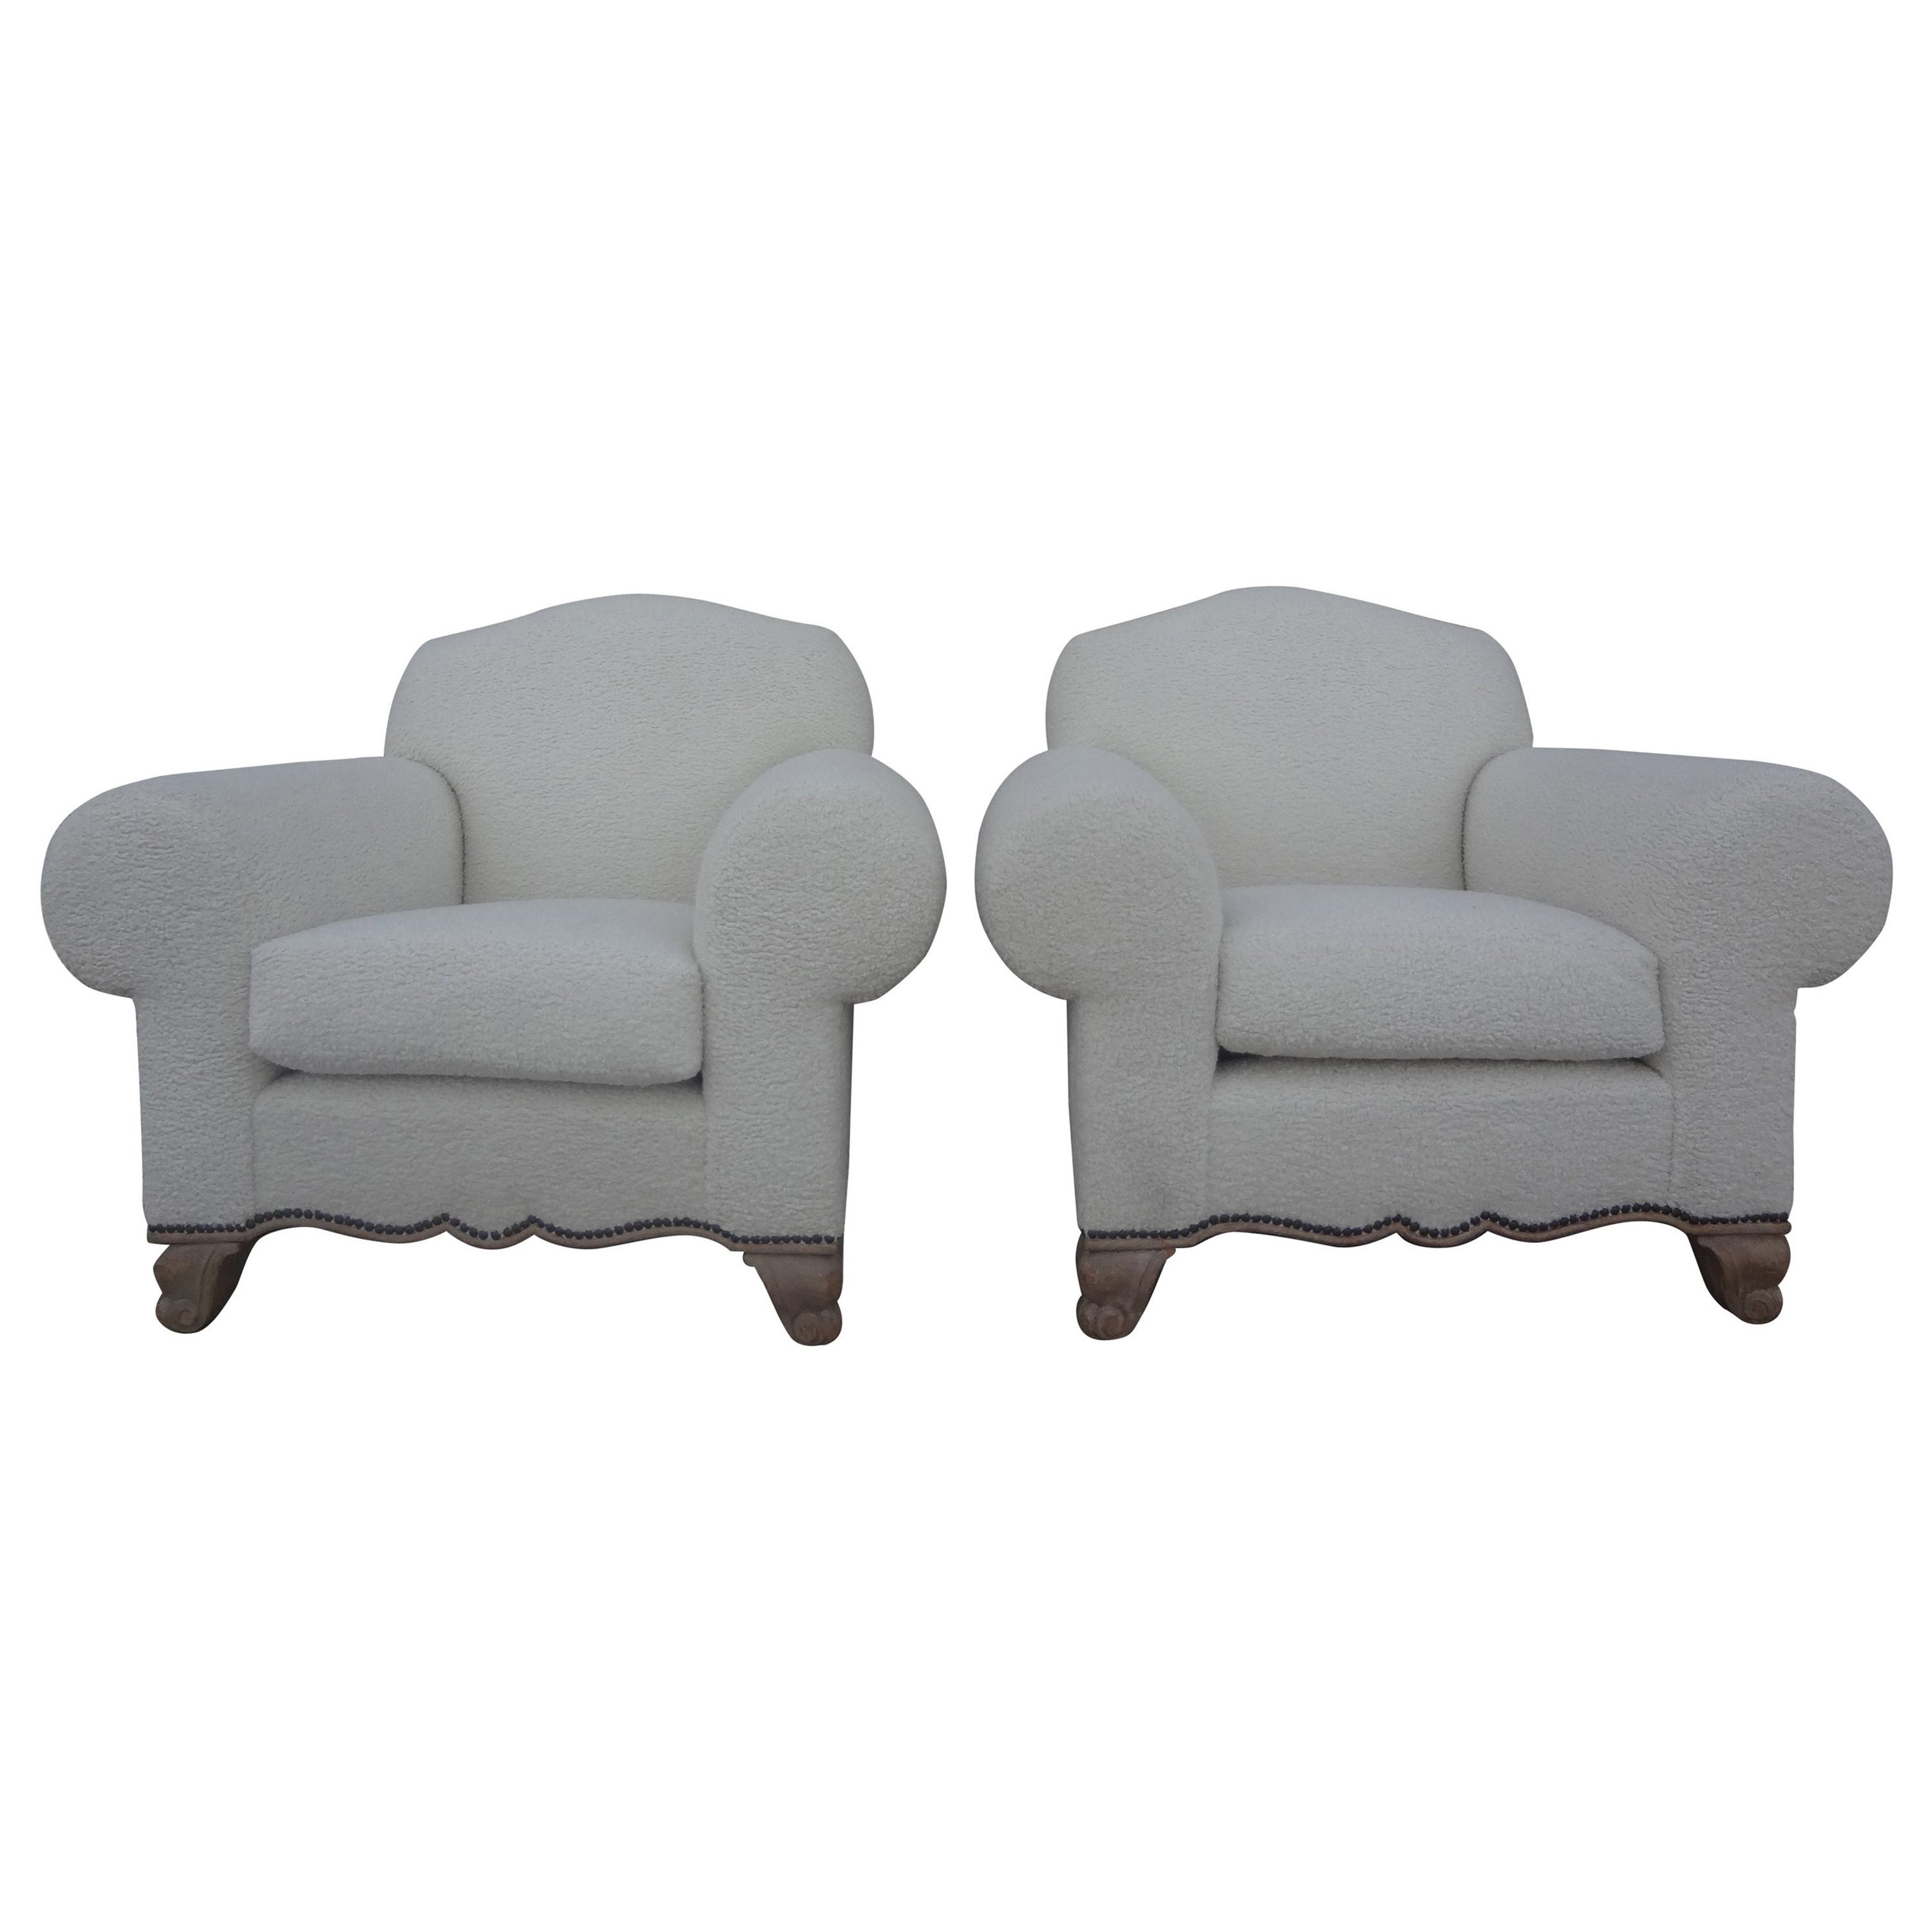 Pair of French Art Deco Club Chairs by Jacques Adnet